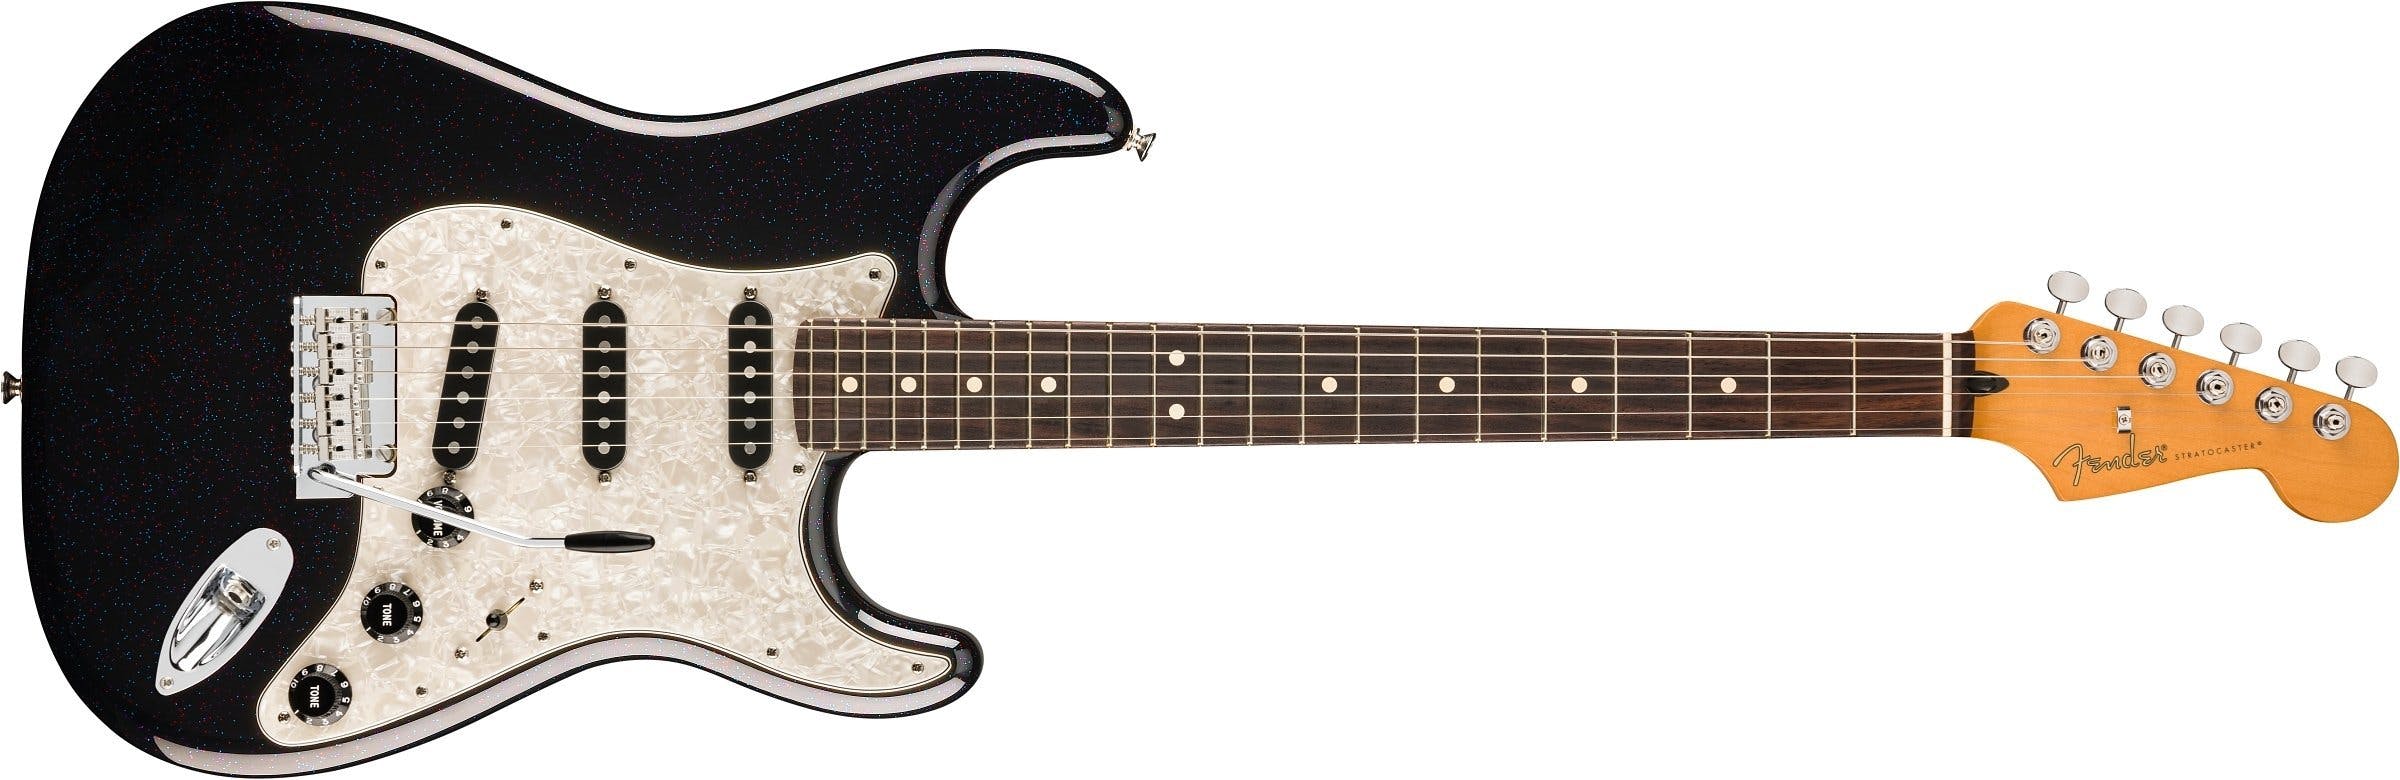 Plus, Your Chance to Win a Fender Guitar